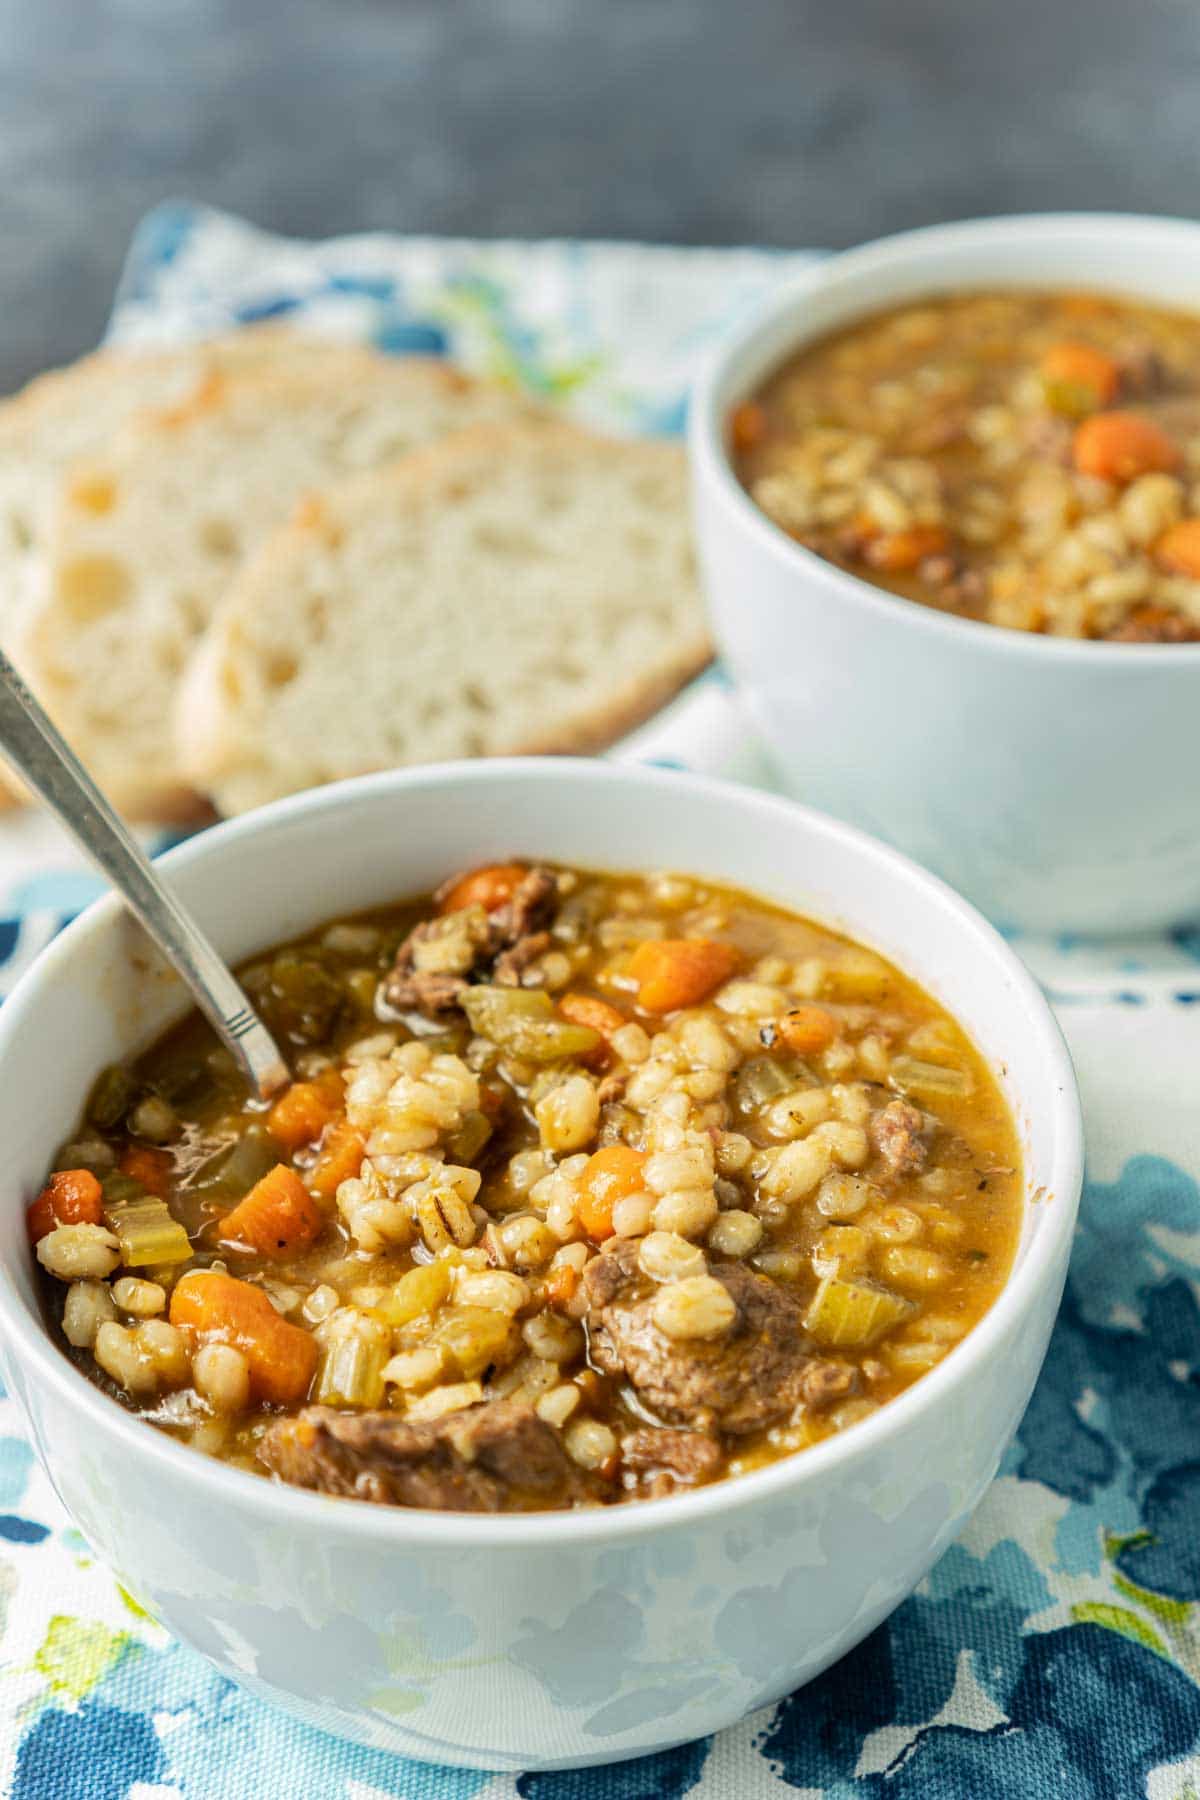 Top 15 Most Shared Best Beef Barley soup – Easy Recipes To Make at Home